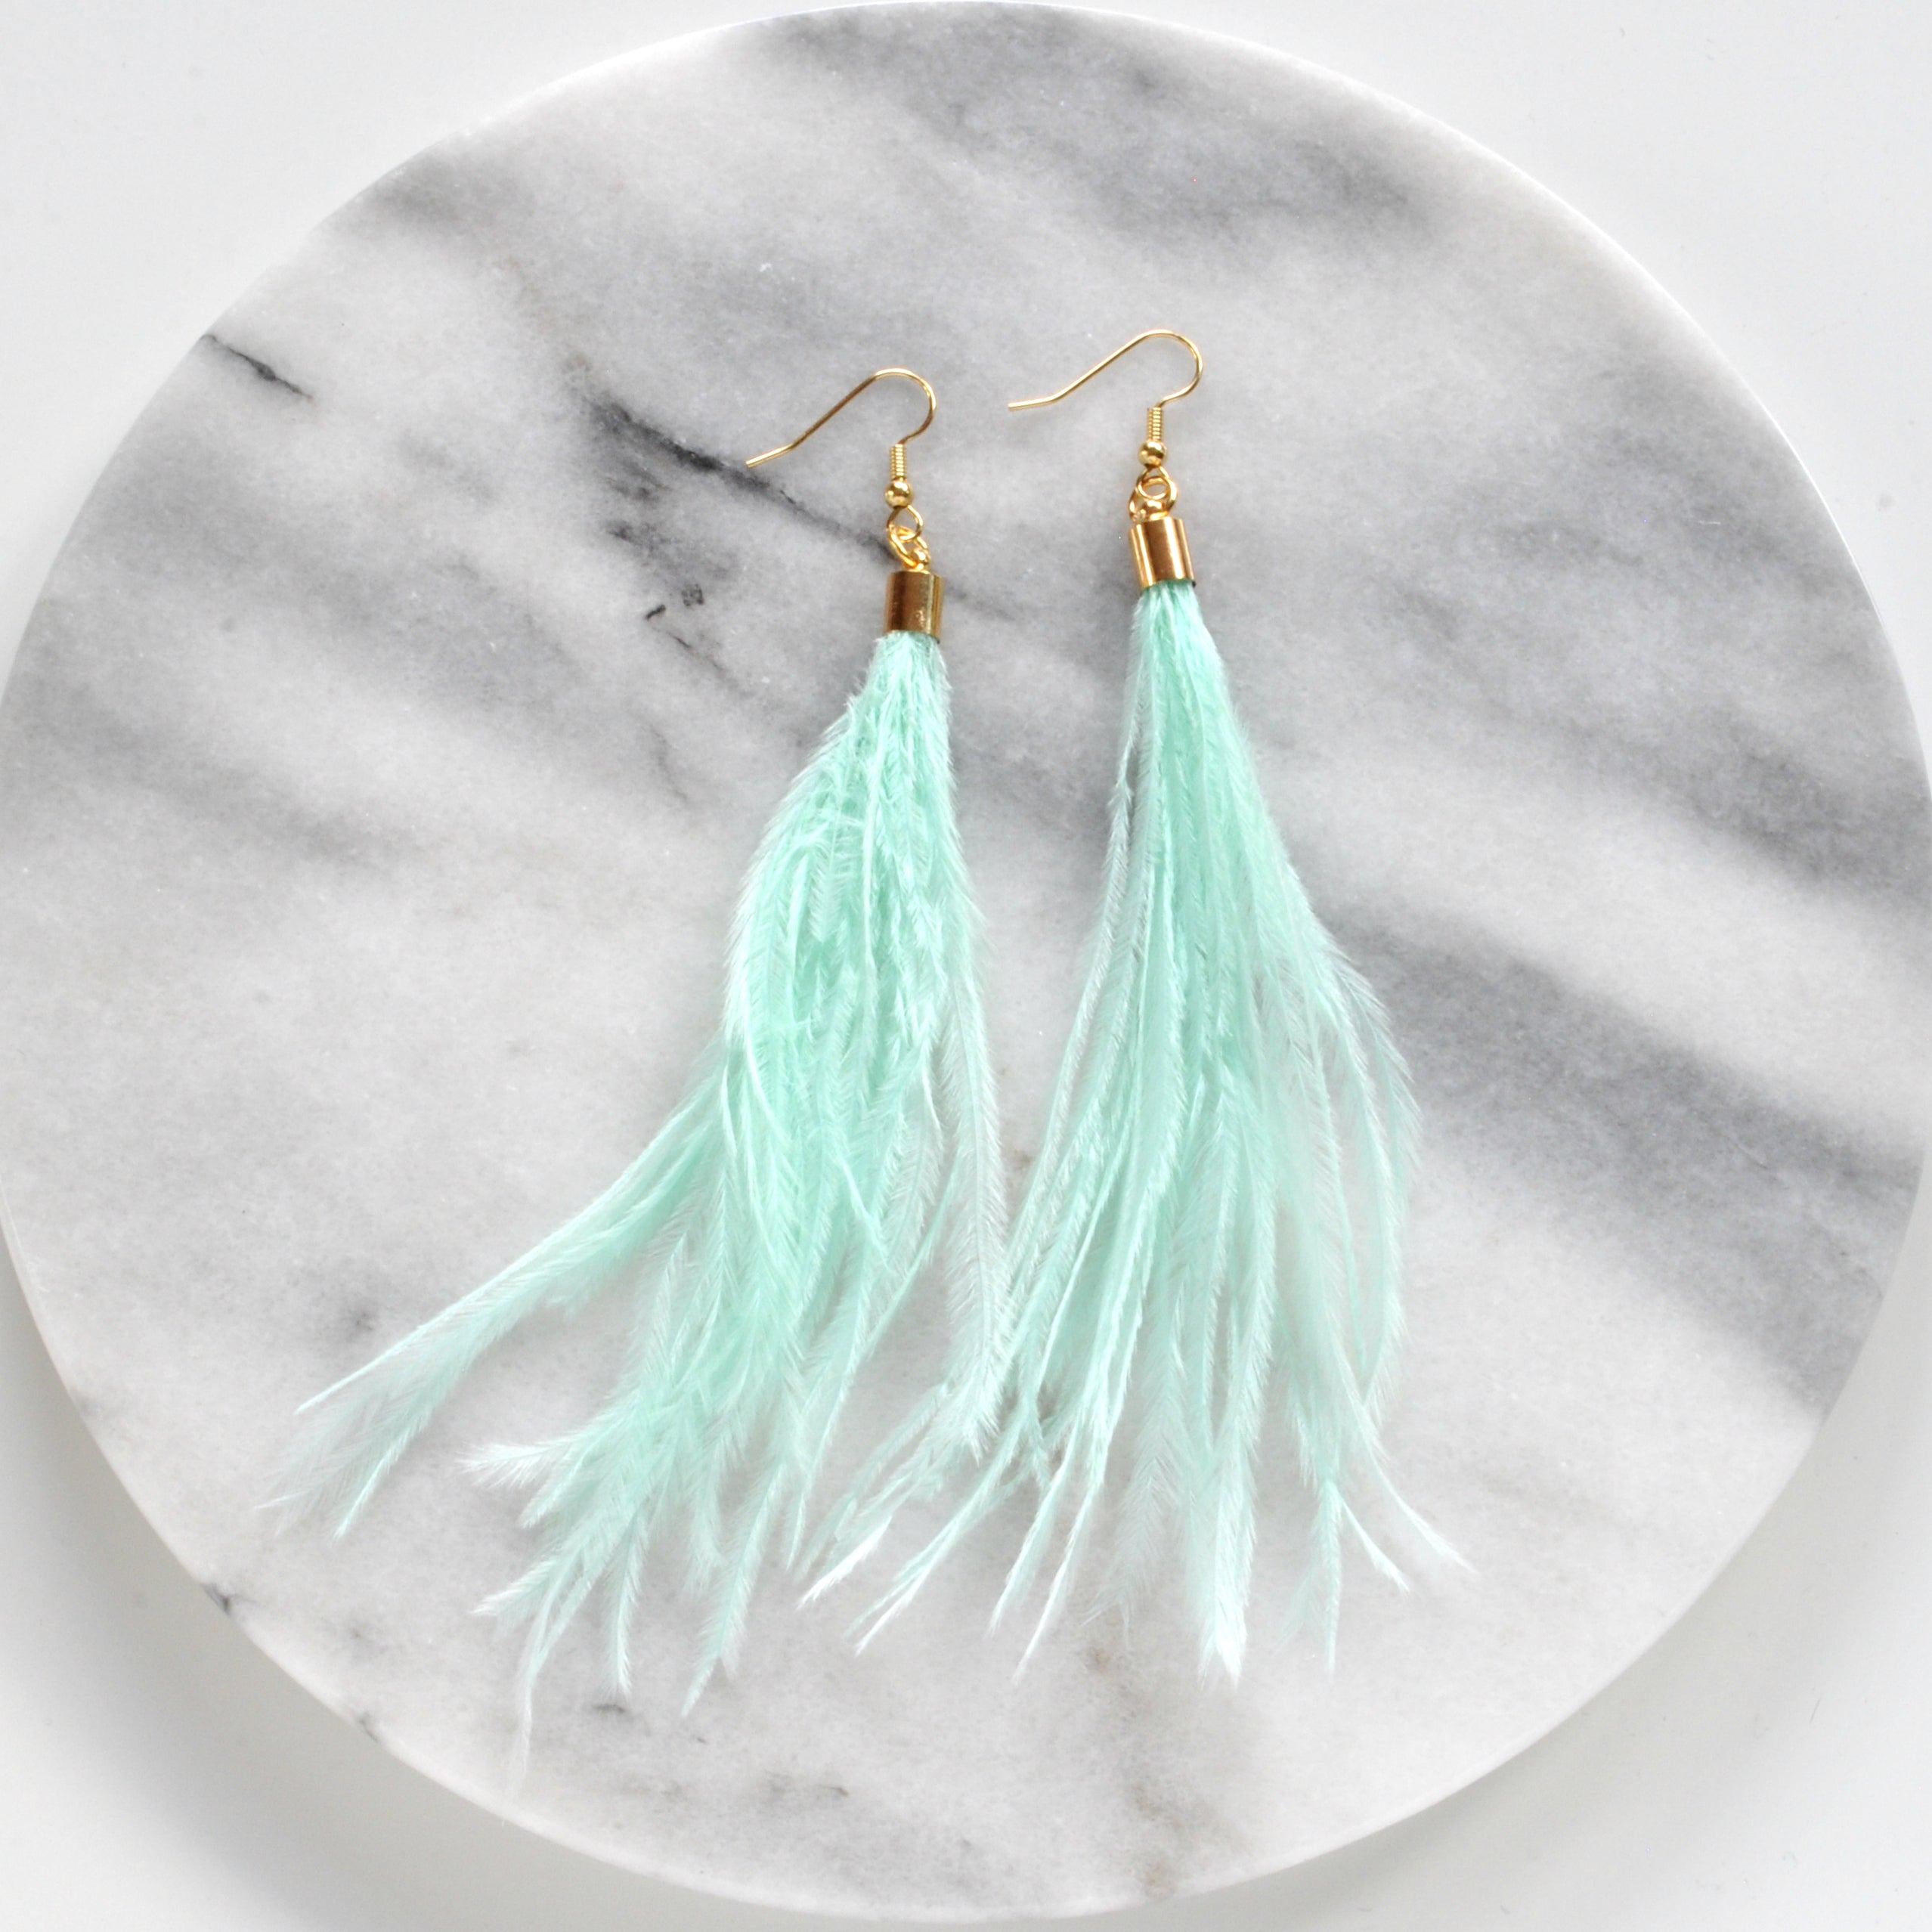 Seafoam Ostrich Feather Earrings | Handmade by Libby & Smee